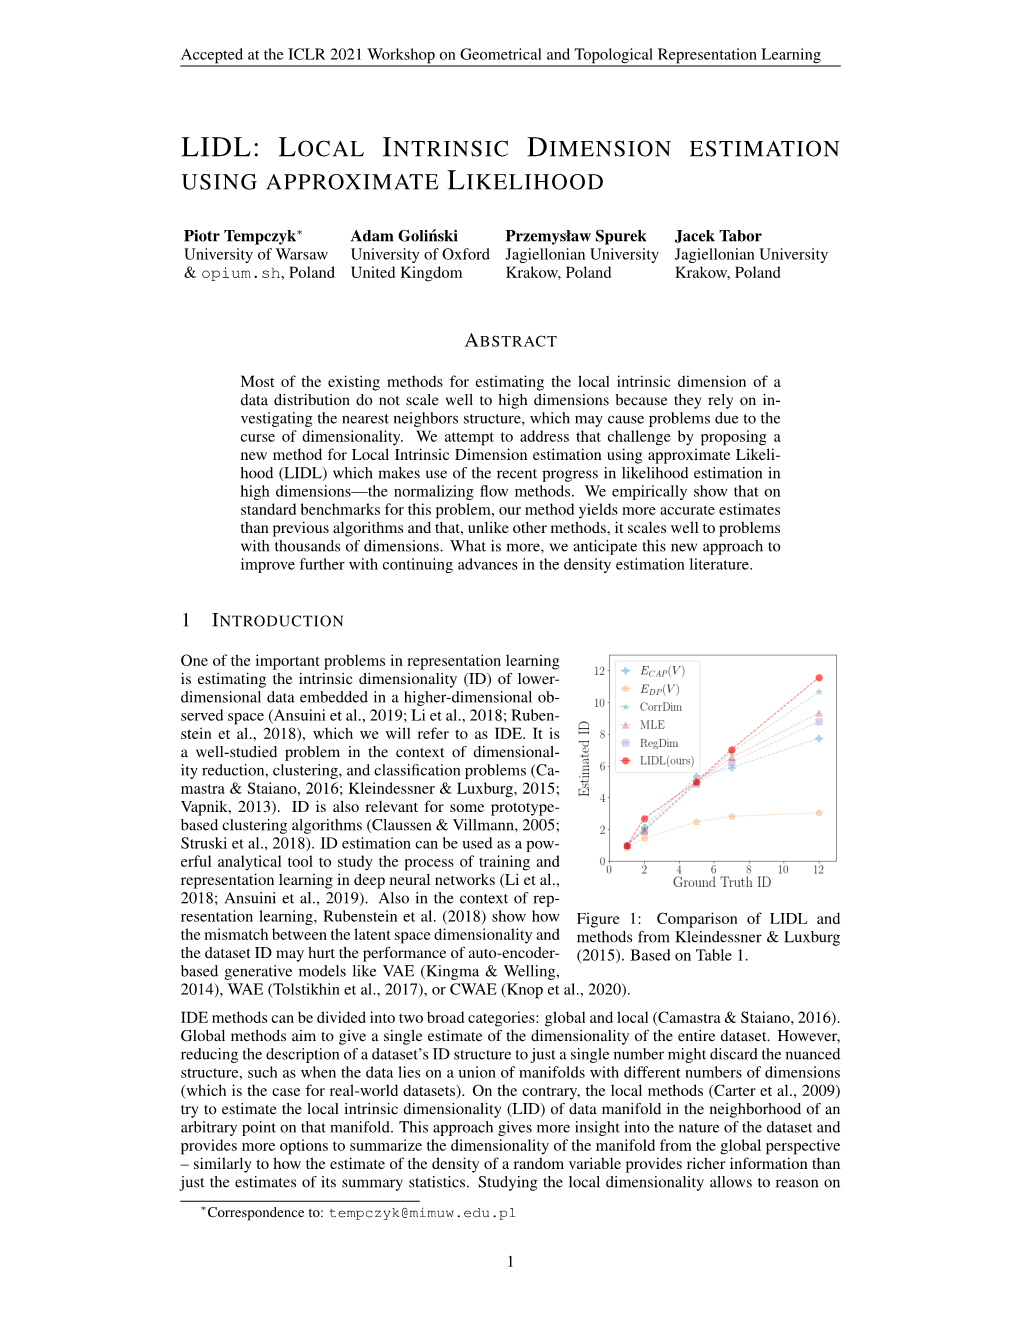 LIDL: Local Intrinsic Dimension Estimation Using Approximate Likelihood